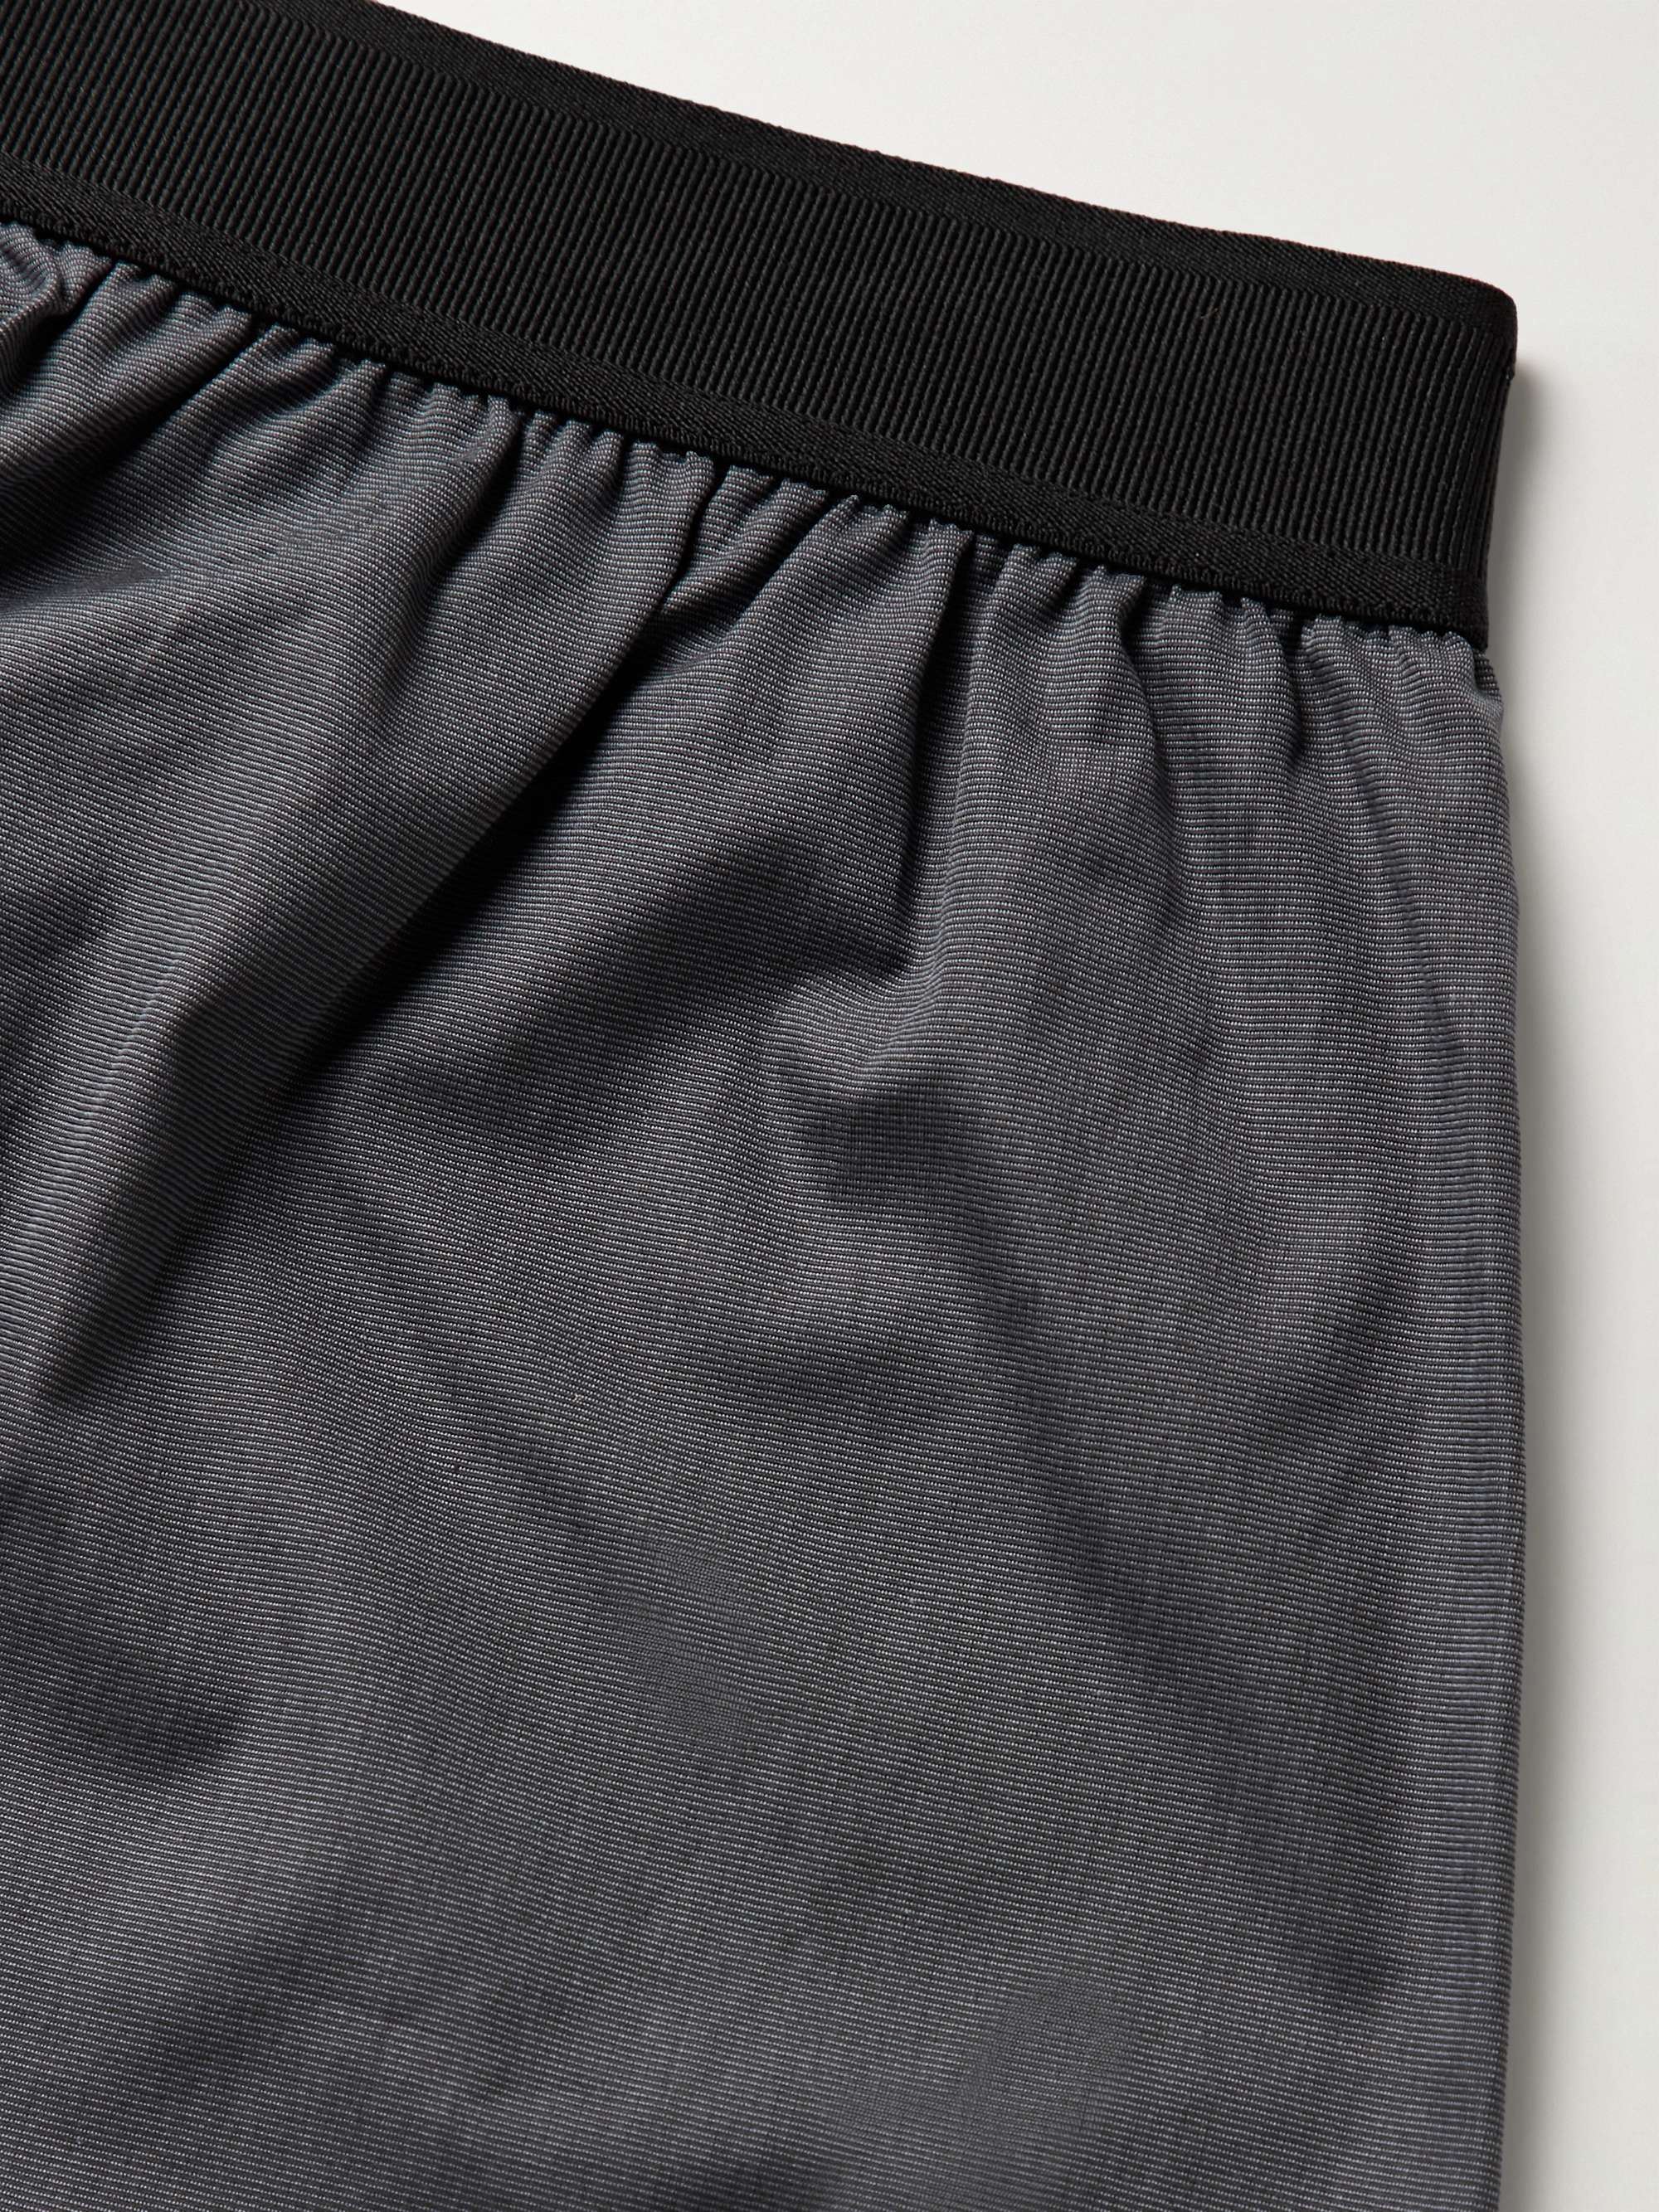 TOM FORD Cotton Boxer Shorts